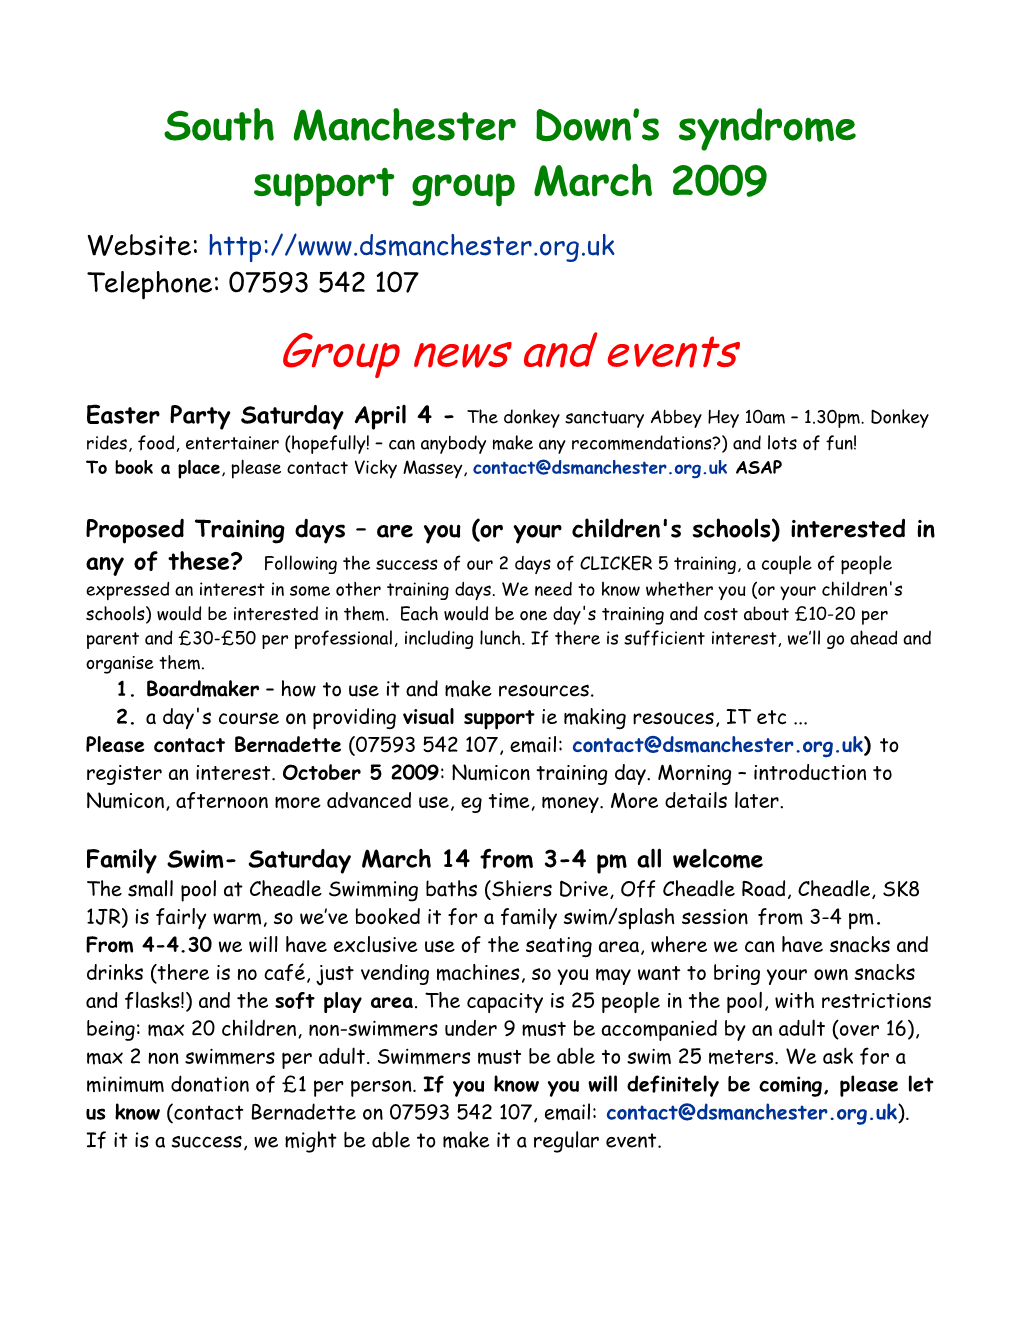 South Manchester Down S Syndrome Support Group